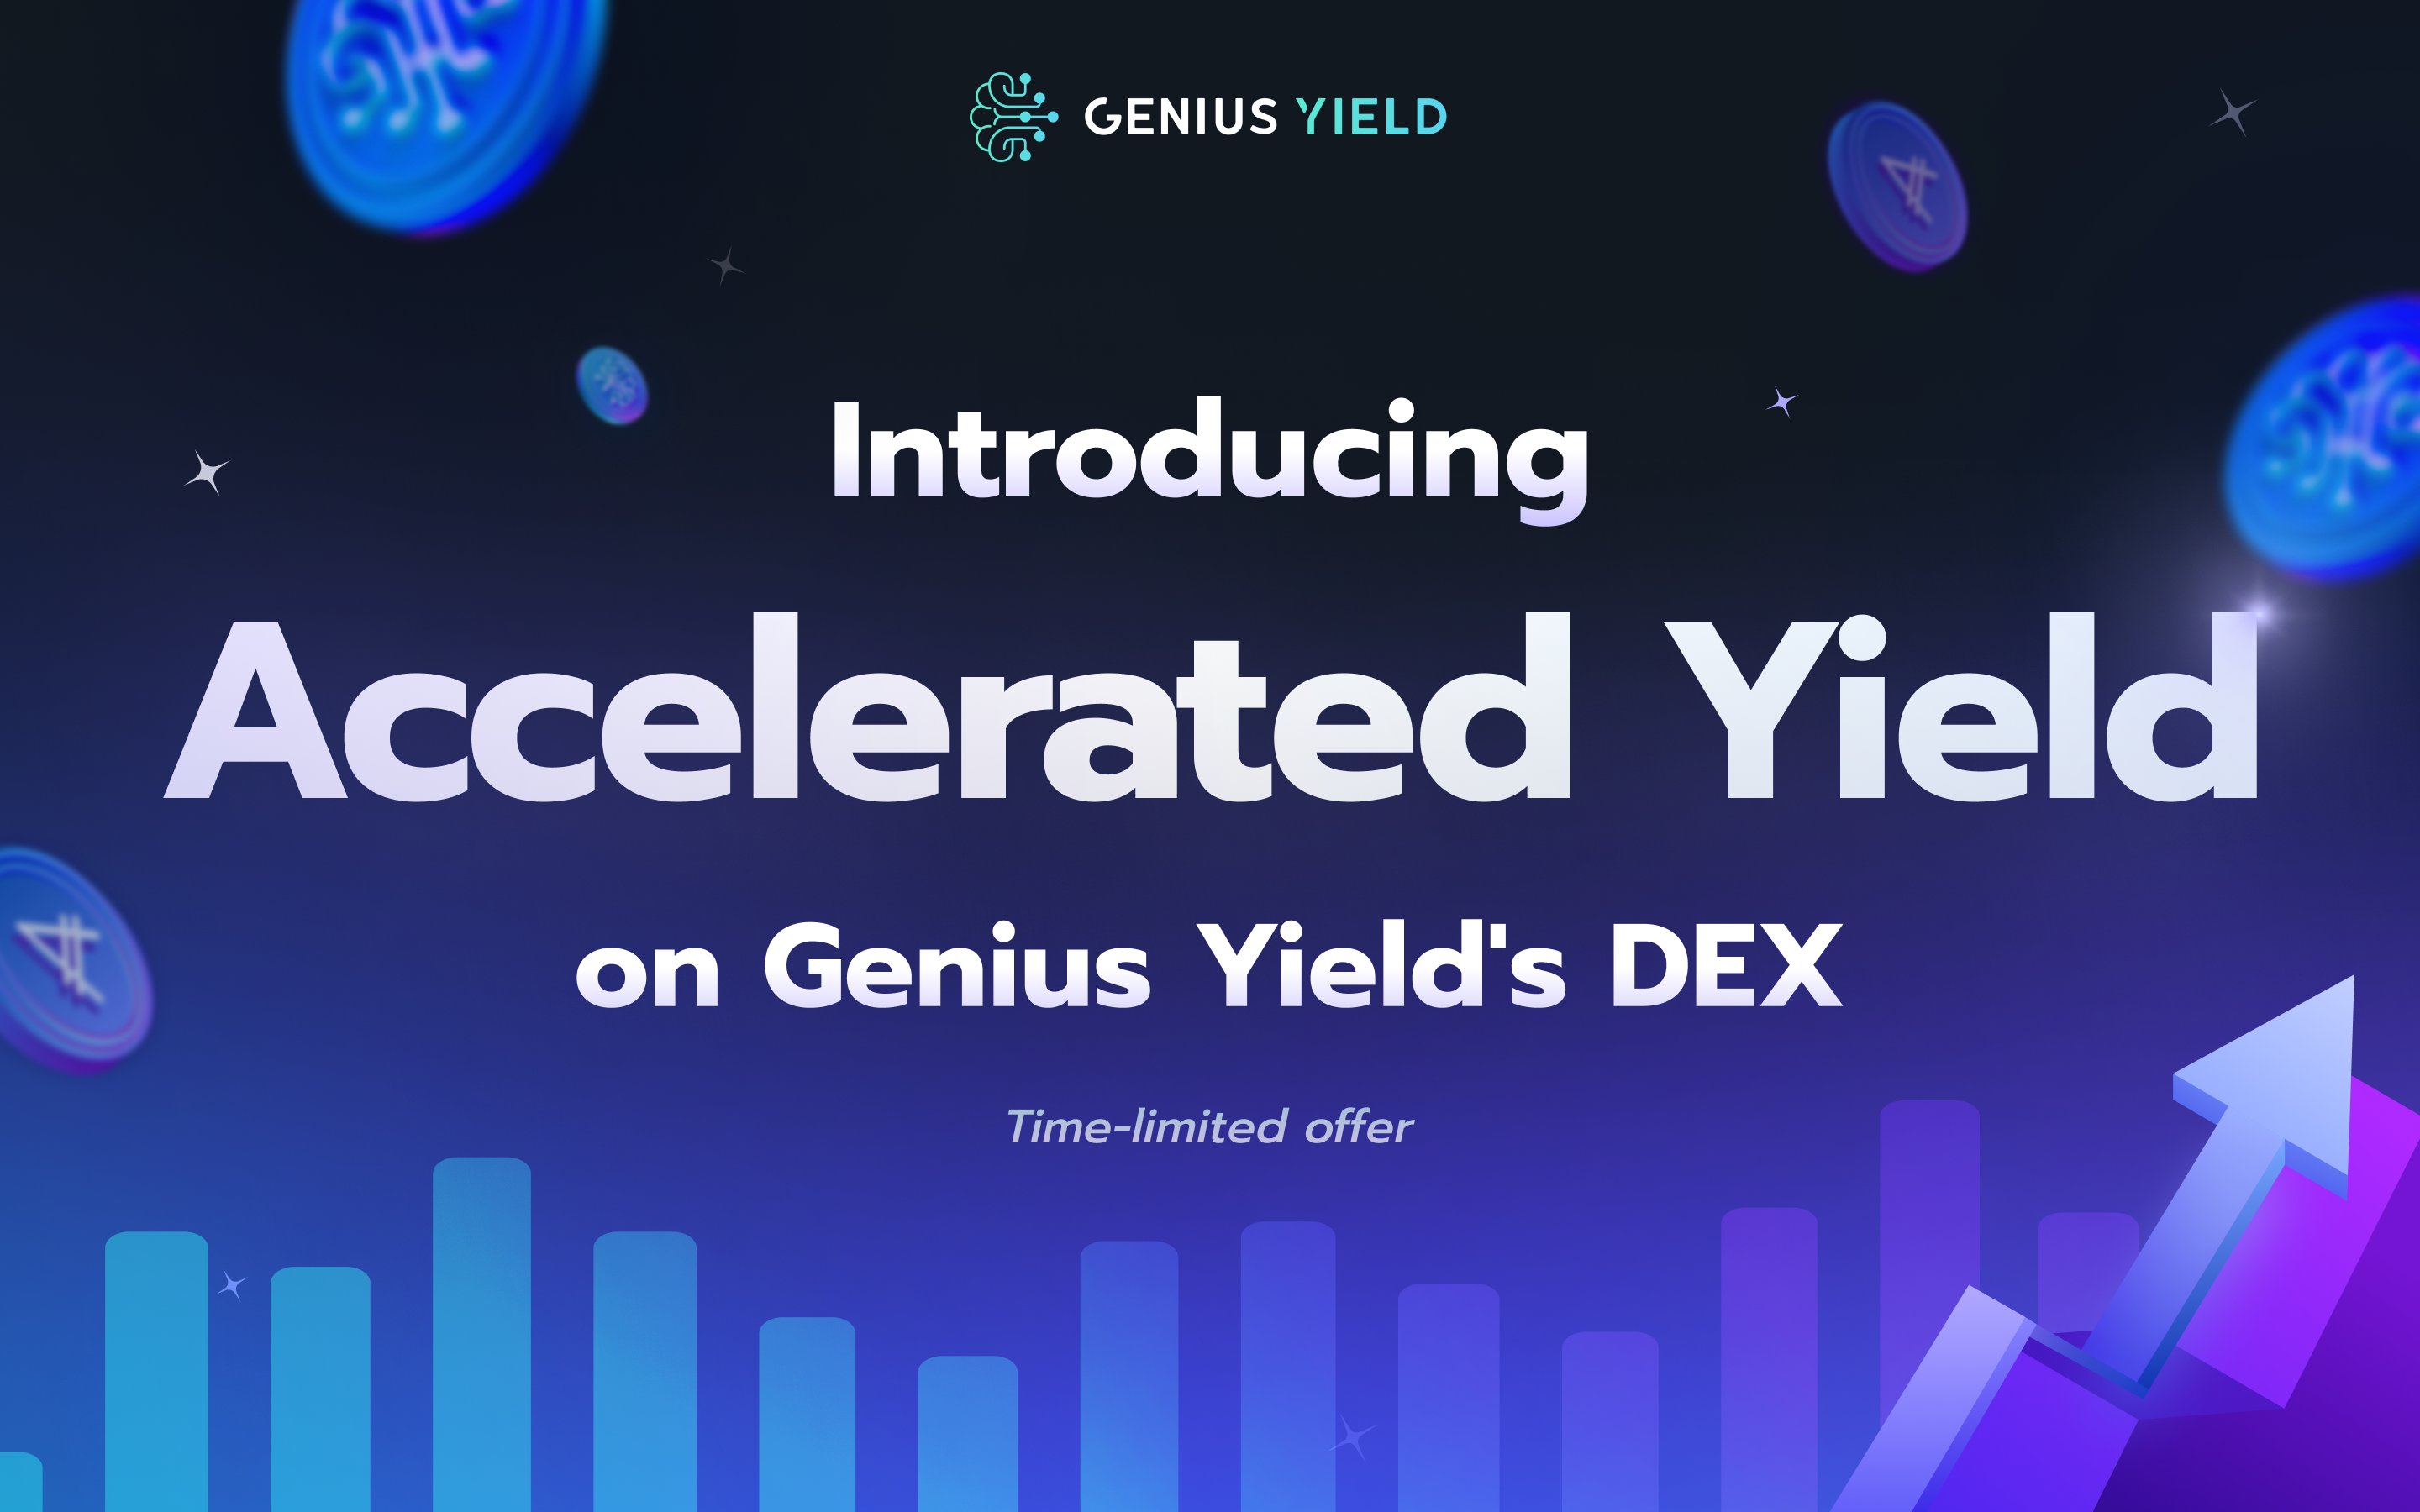 Genius Yield Accelerated Yield Event!